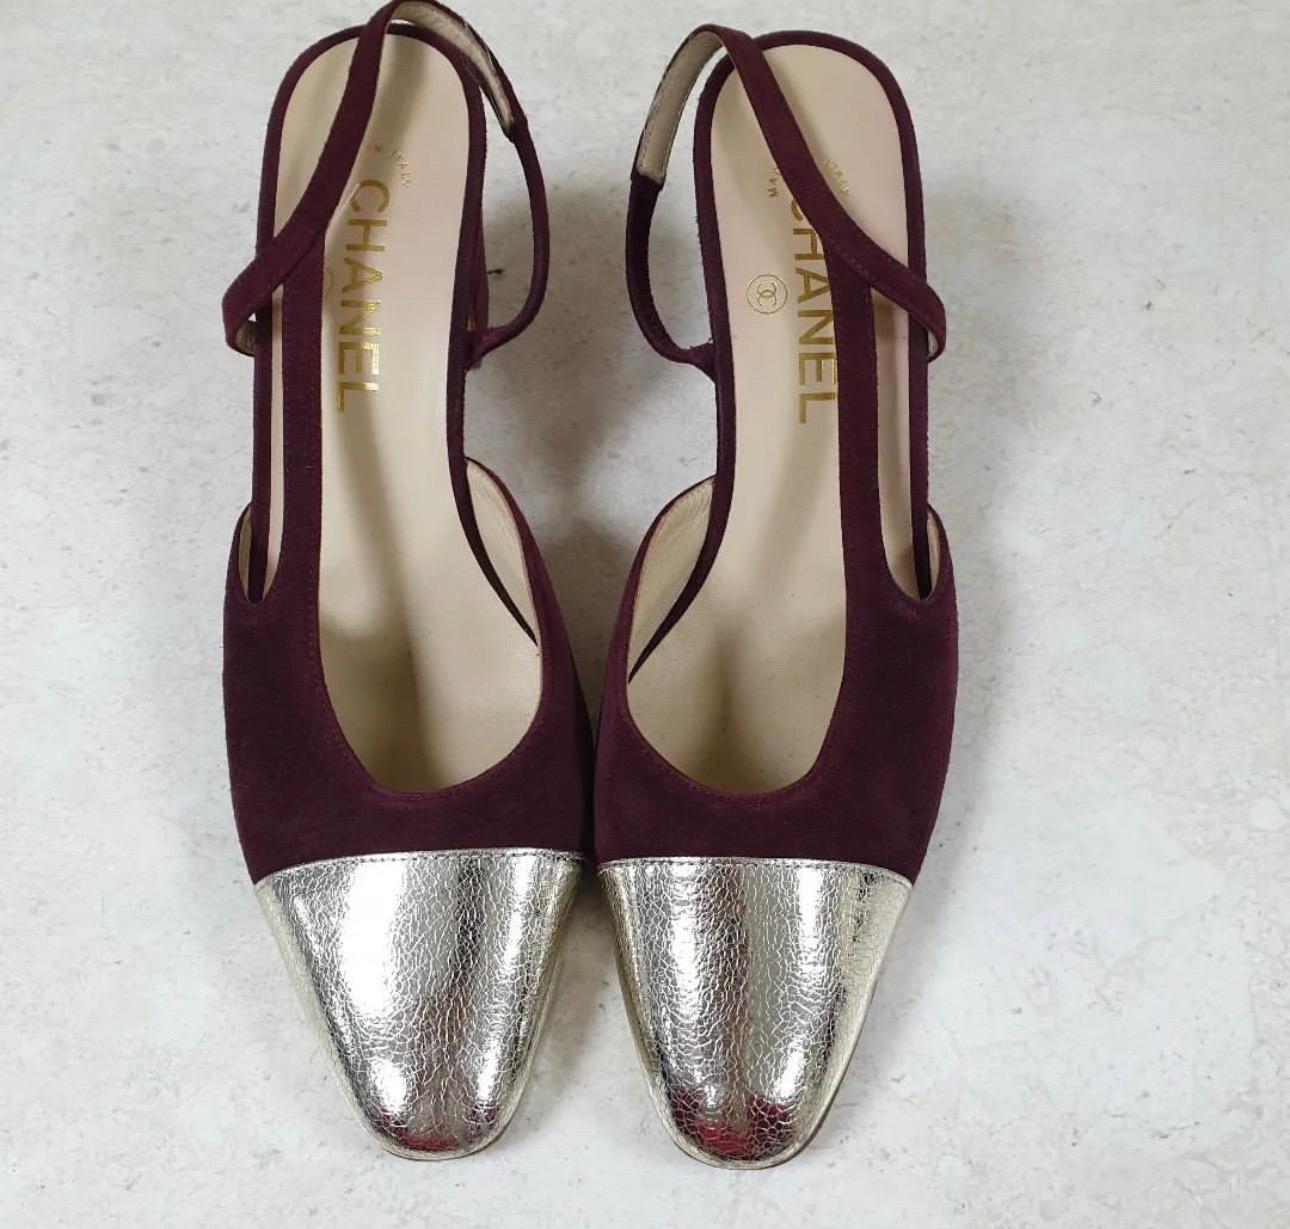 Bring Chanel's chic aesthetics and flawless skill to your collection with these beautiful sandals. 
They have been designed using burgundy suede and metallic-silver leather on the exterior and feature cap toes and a slingback. 
For a classy touch,